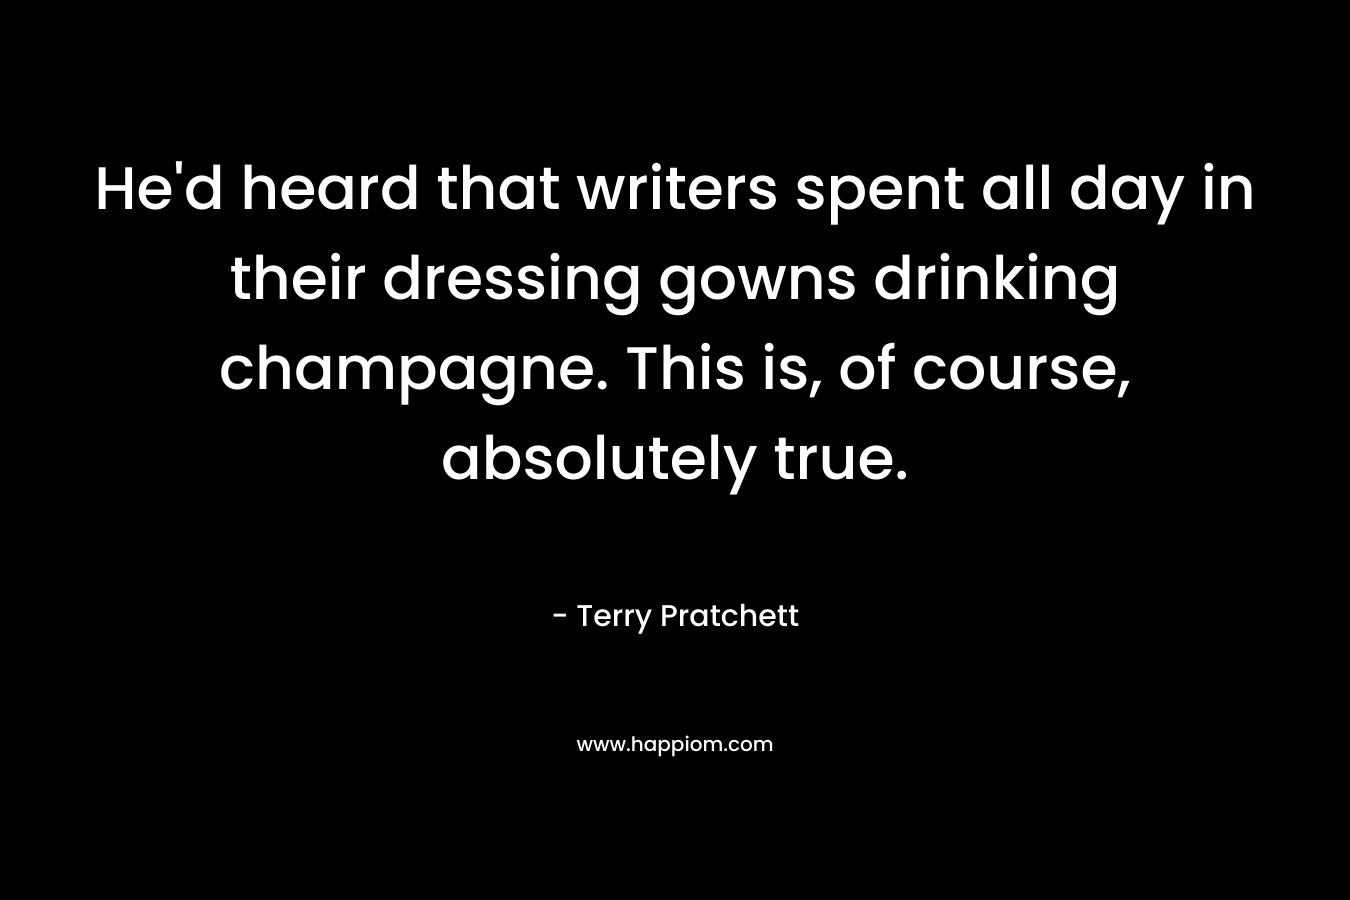 He’d heard that writers spent all day in their dressing gowns drinking champagne. This is, of course, absolutely true. – Terry Pratchett